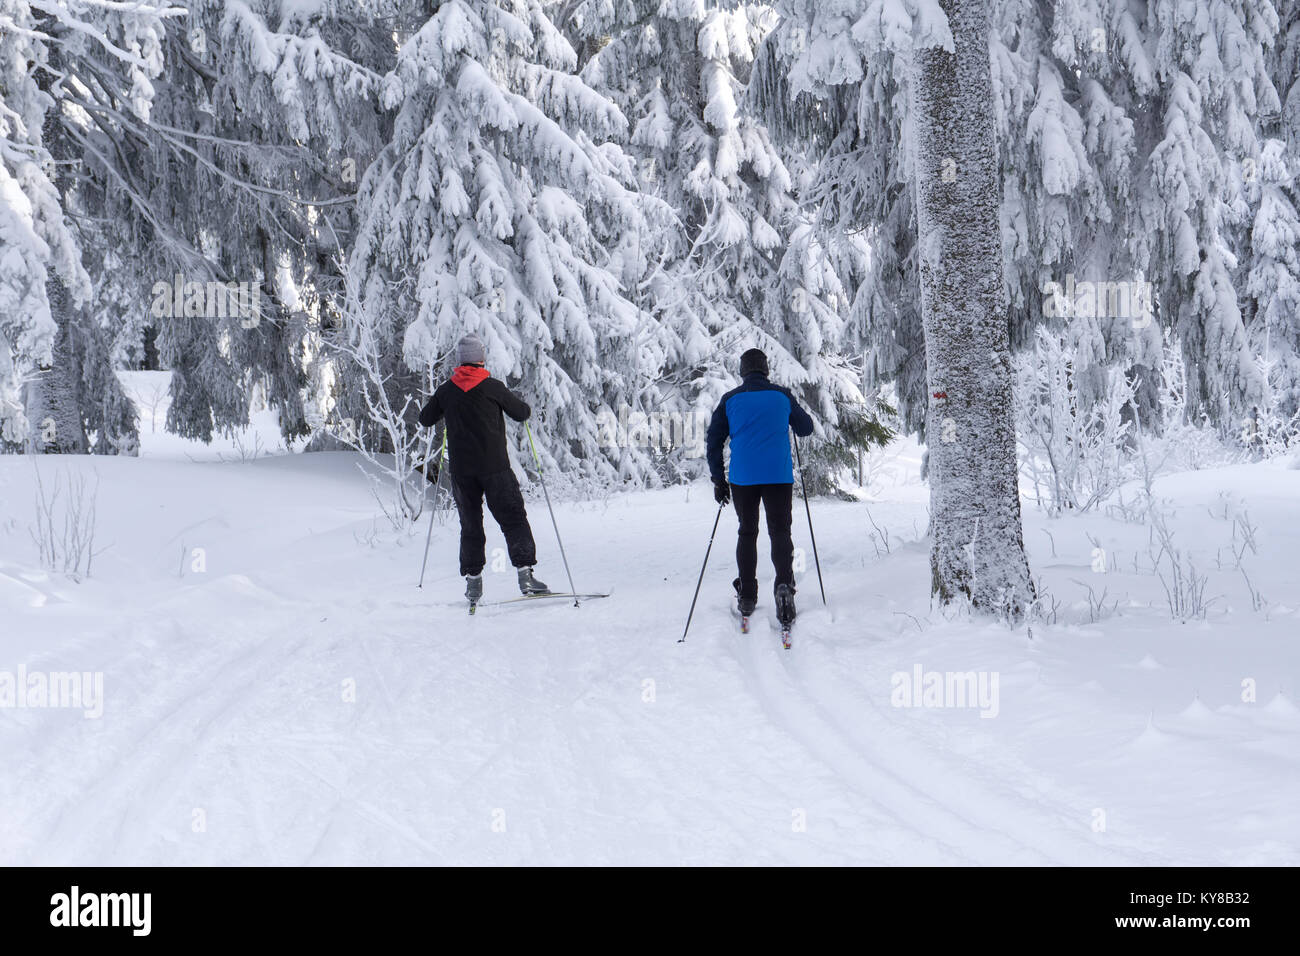 Groomed ski trails for cross country skiing with two cross-country skiers in winter sunny day, trees covered with hoarfrost illuminated by the sun. Stock Photo